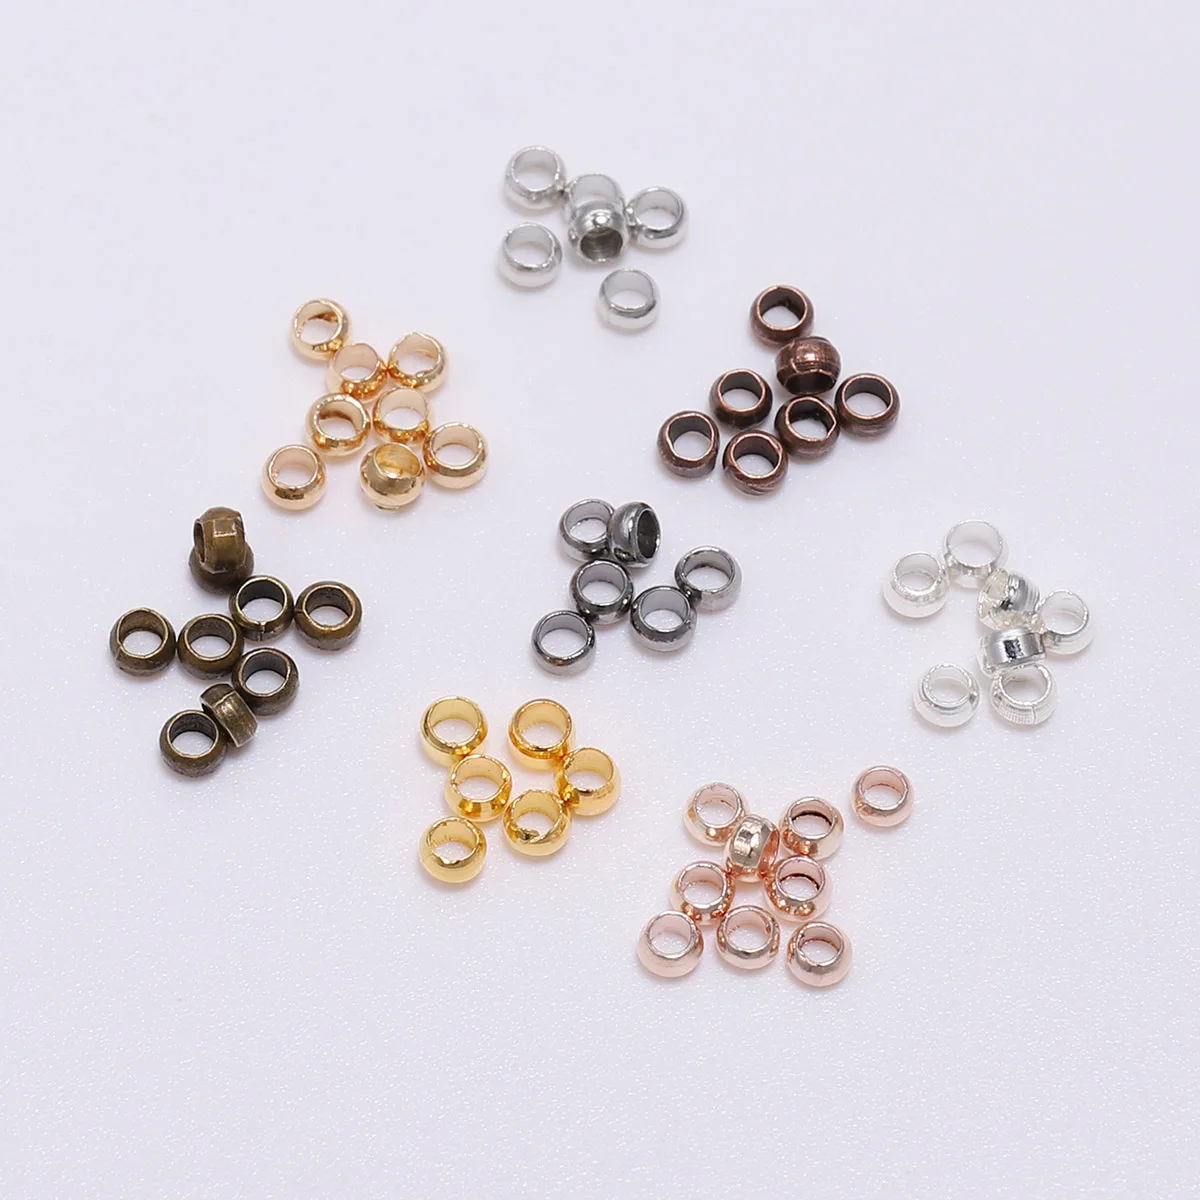 

120-500Pcs/lot 1.5-4mm Gold Ball Plunger Bead Stopper Spacer Smooth Ball Crimps Beads For Jewelry Making Findings Accessories